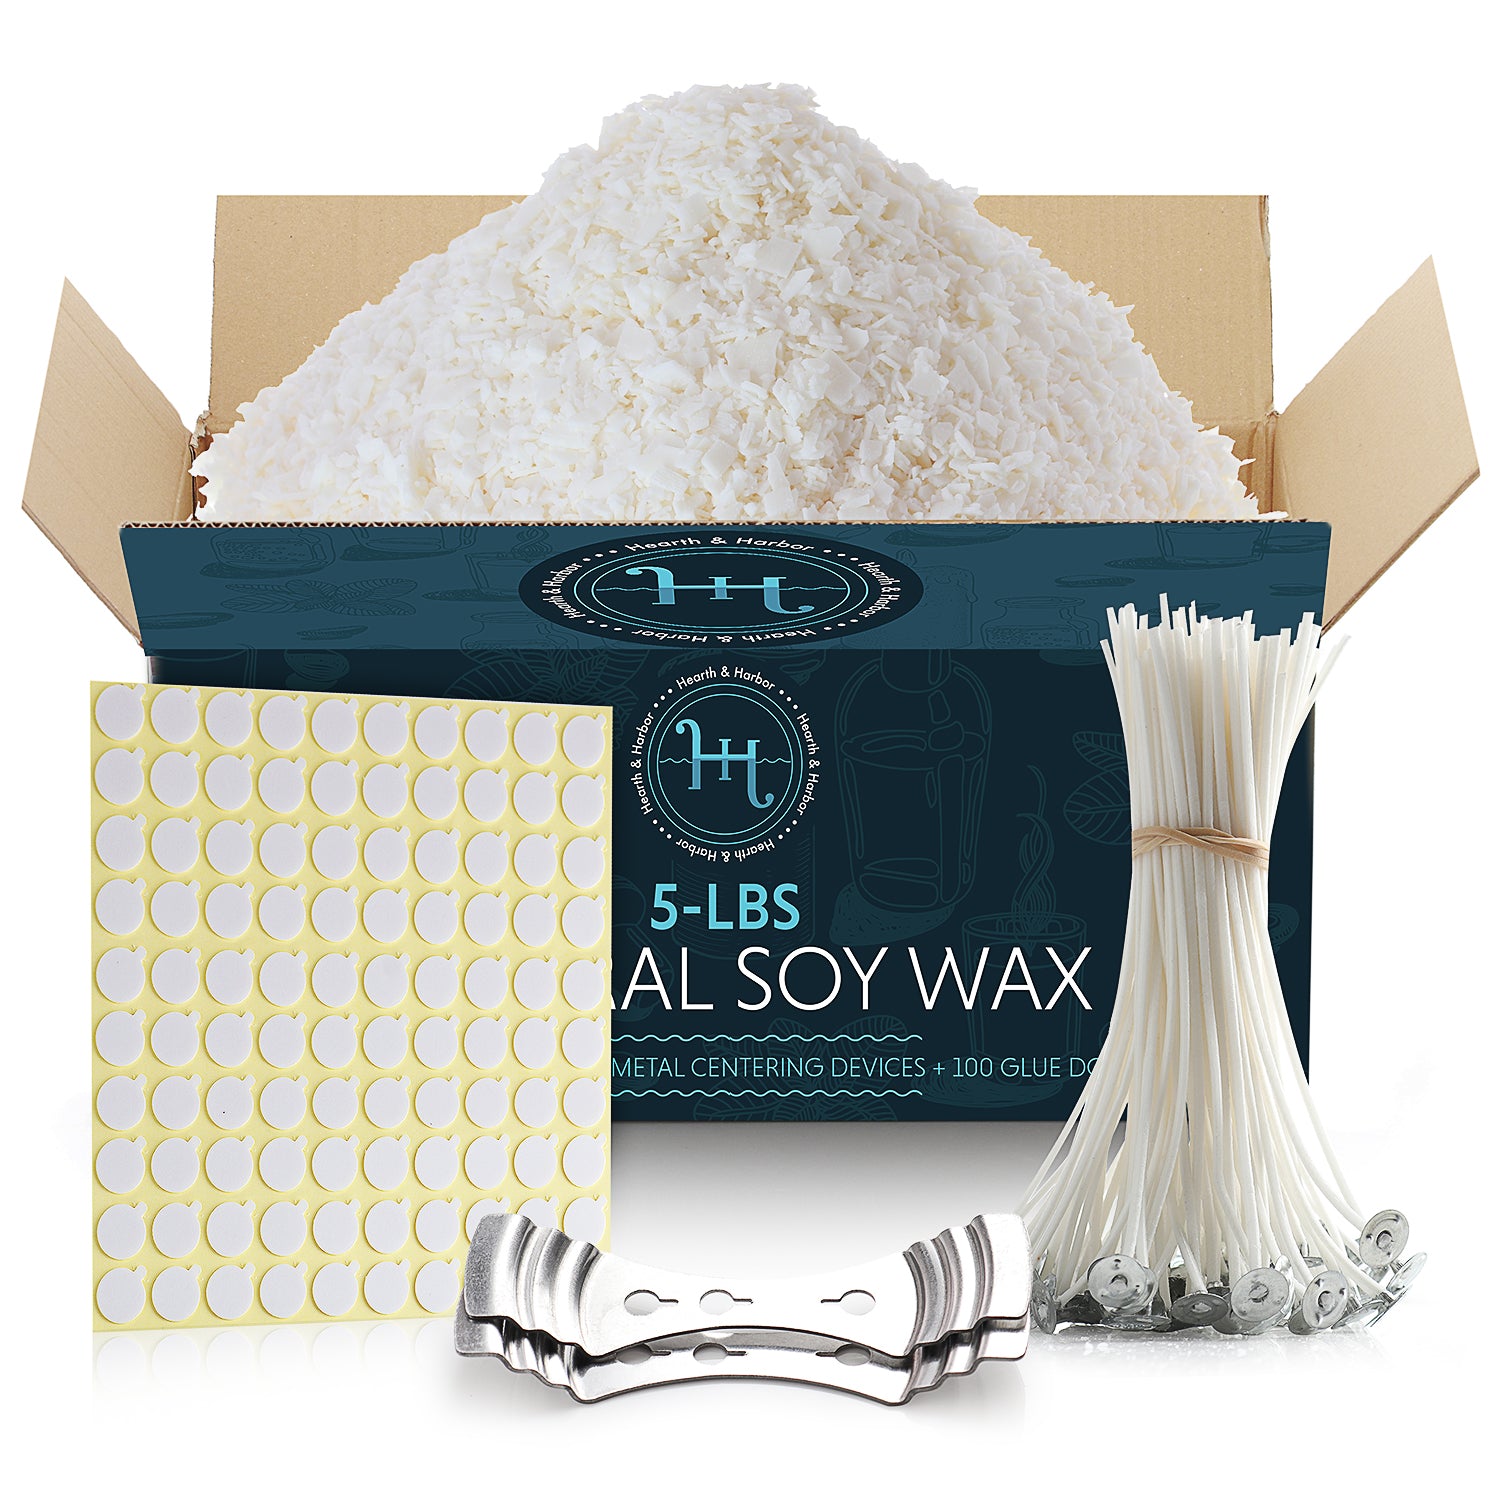 White Soy Wax Flakes high quality Soy Wax Blocks Perfect For